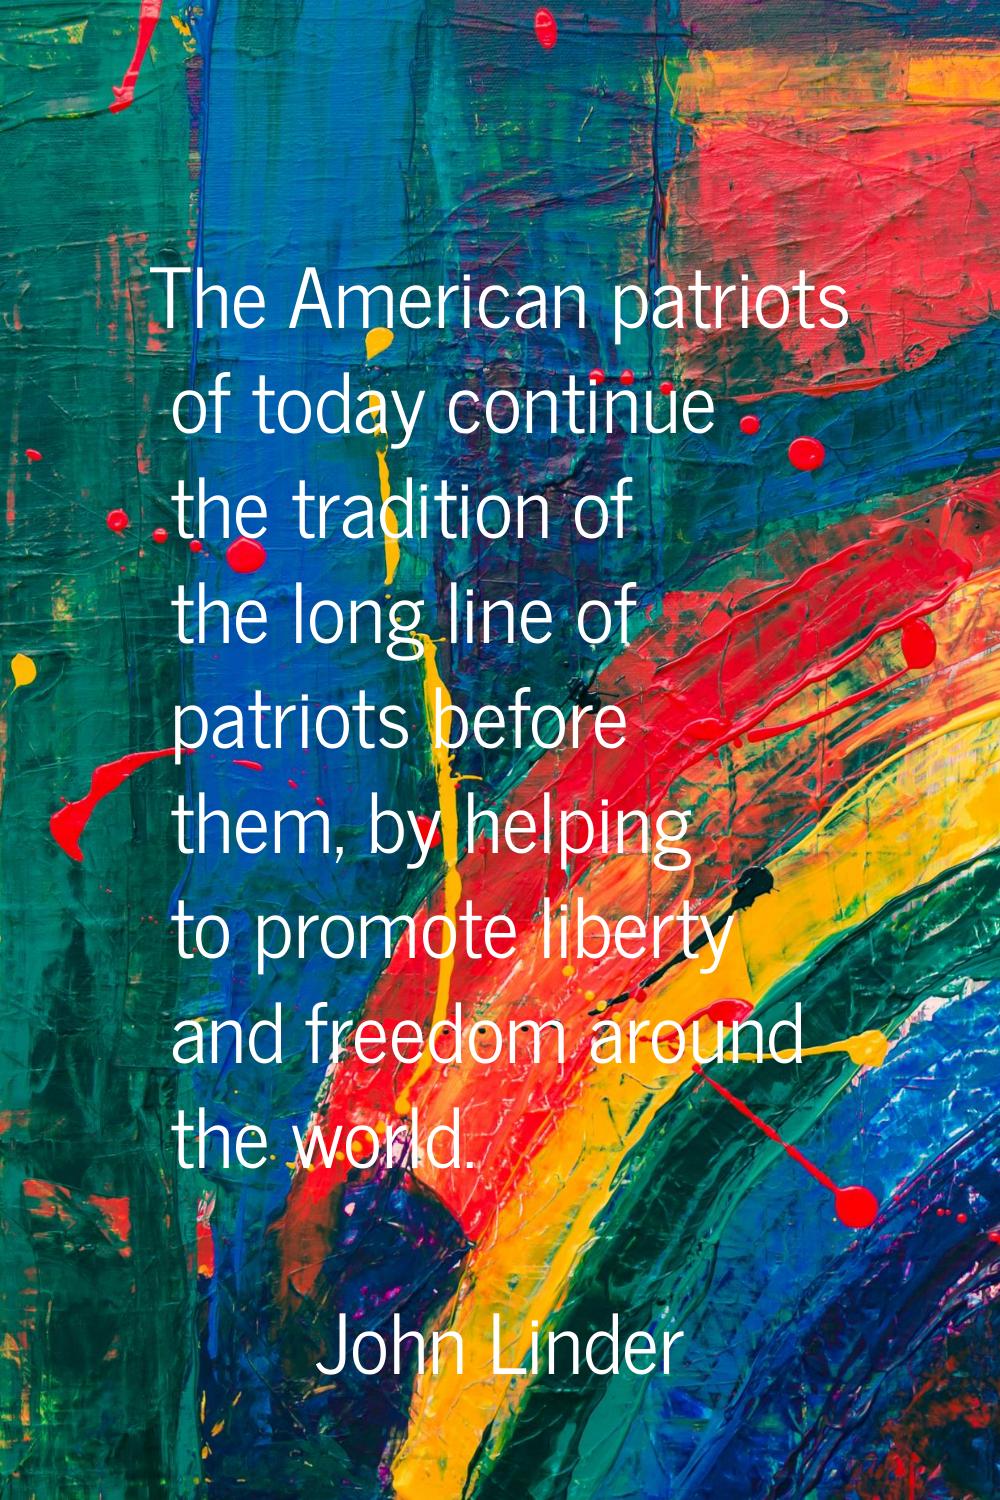 The American patriots of today continue the tradition of the long line of patriots before them, by 